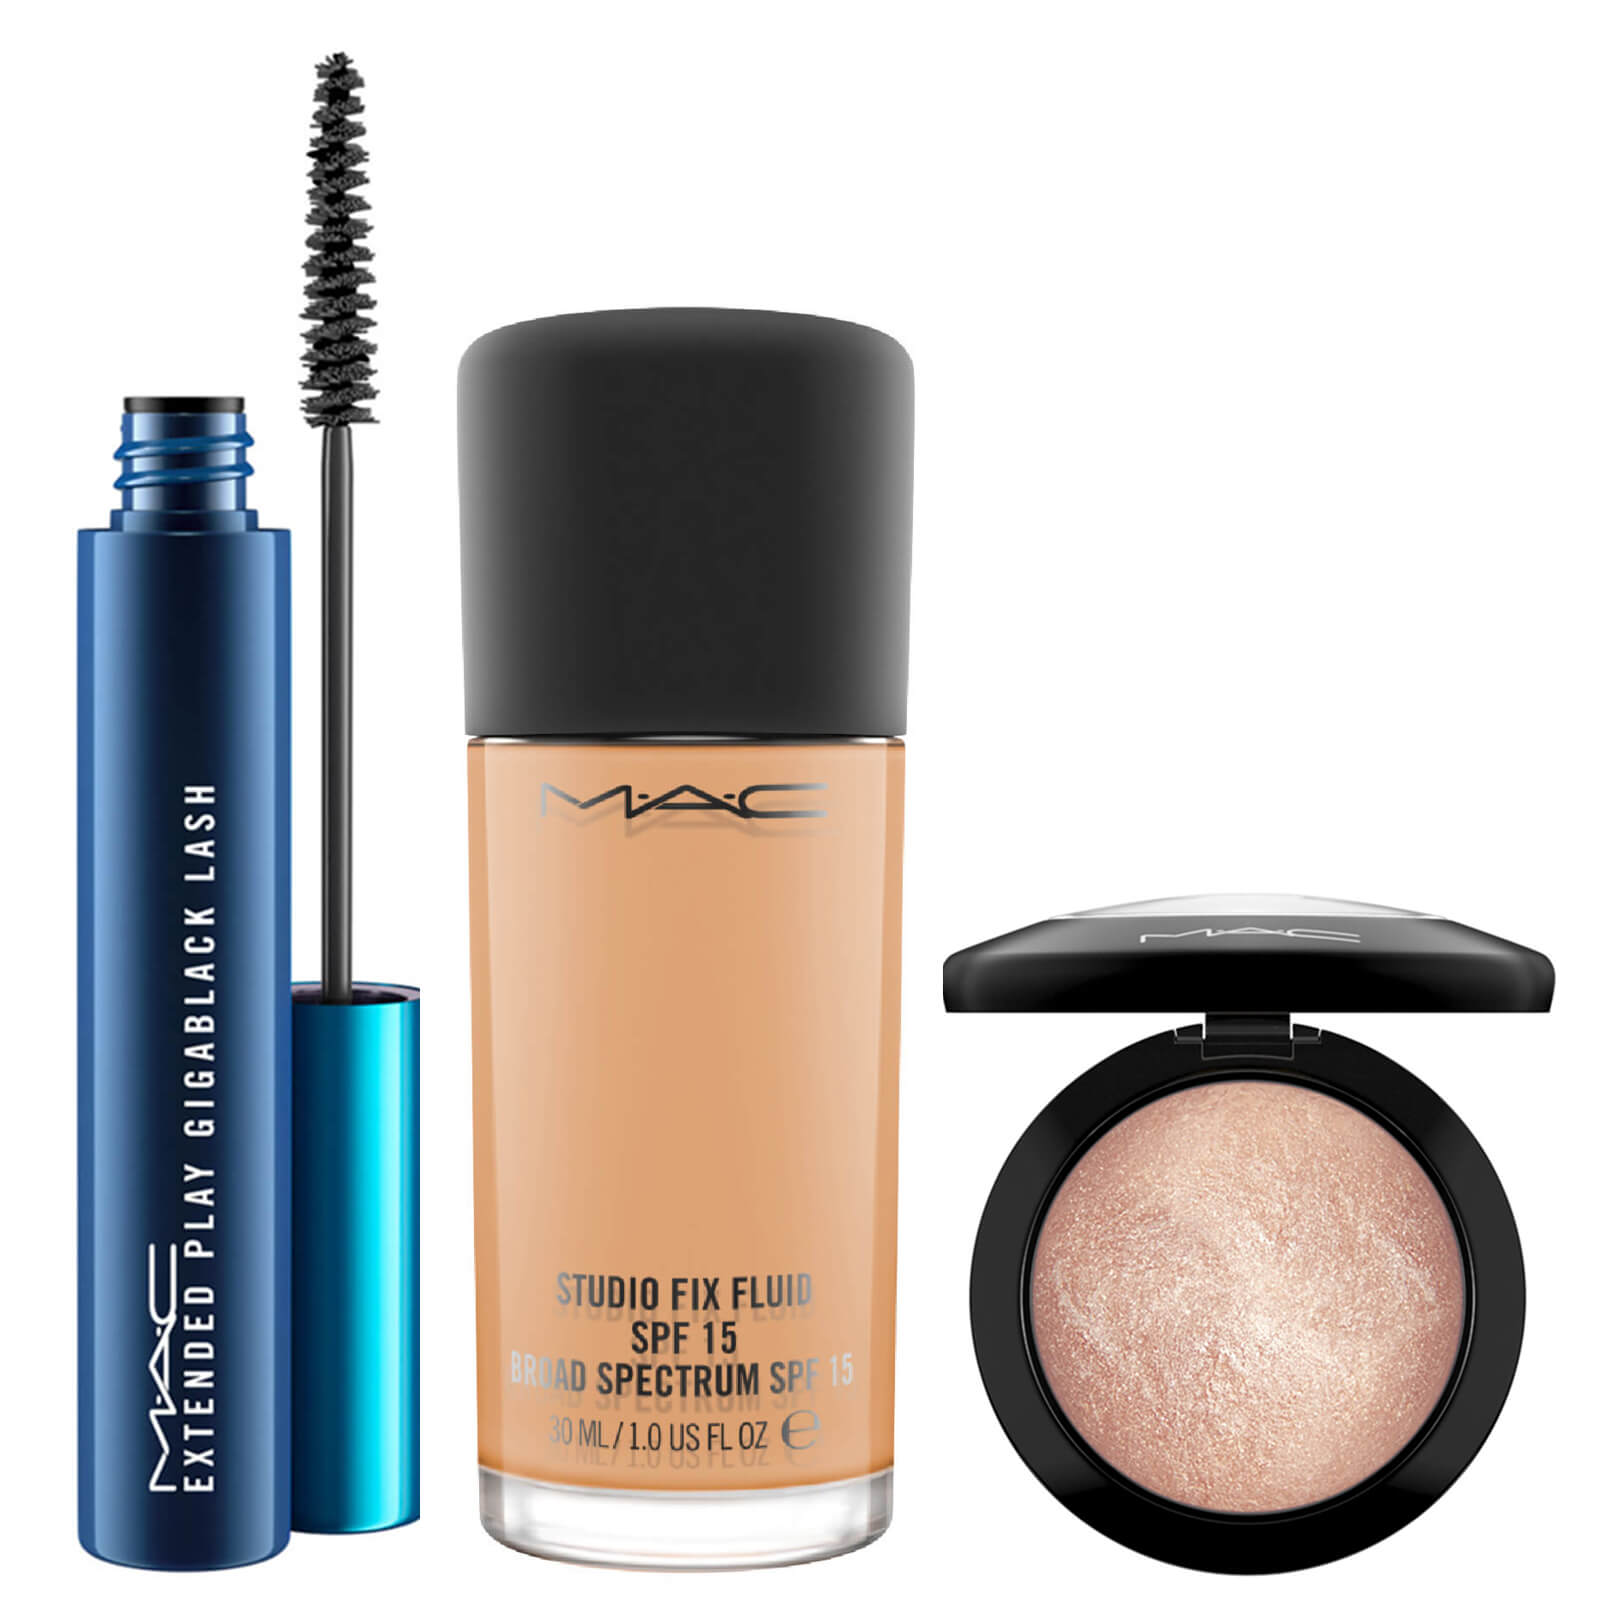 M·A·C Bestsellers Kit (Various Shades) - NW35